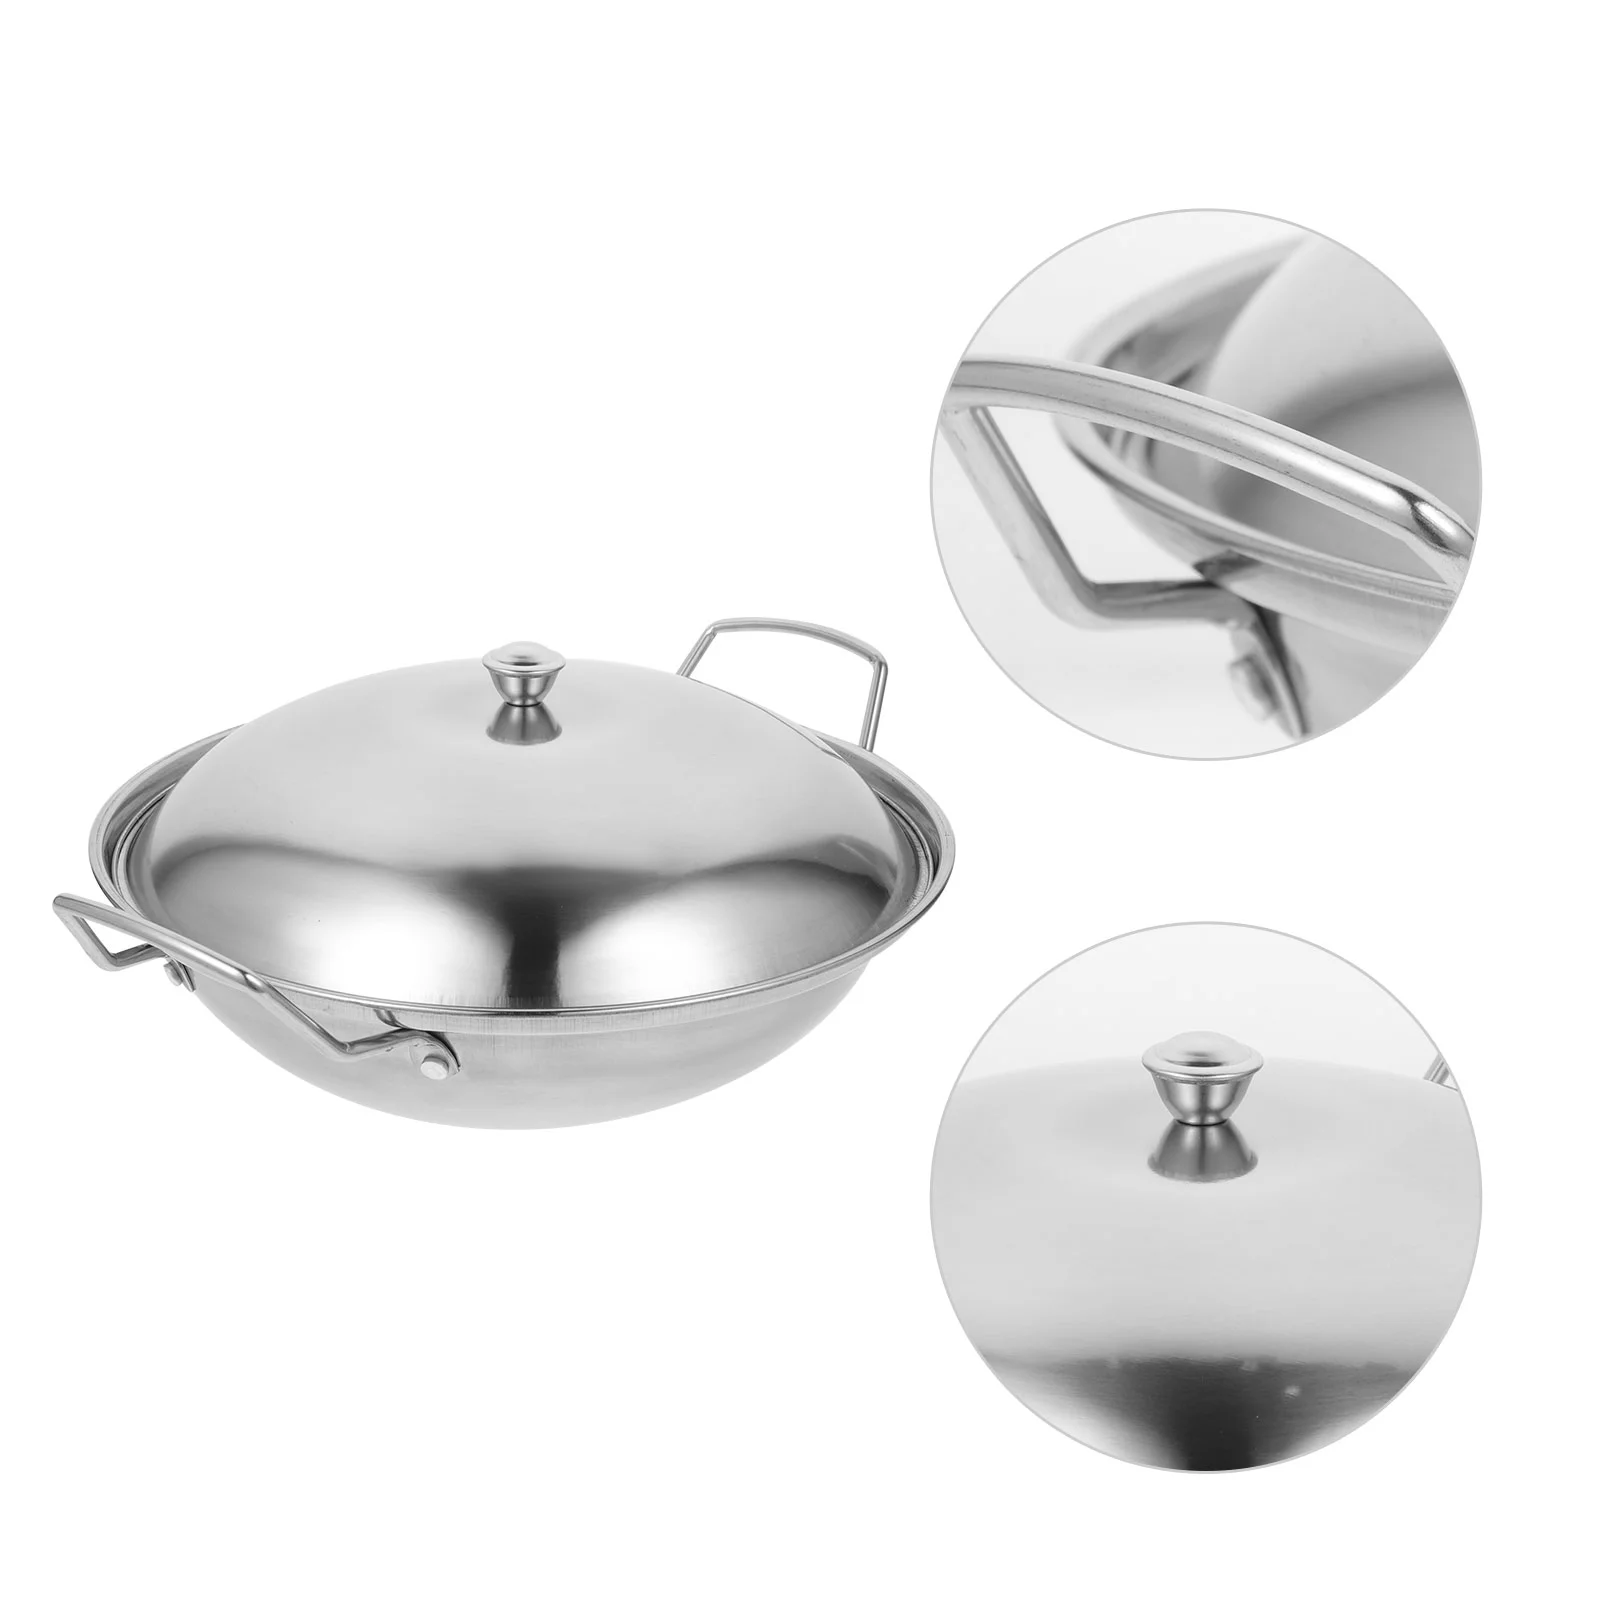 

Pan Wok Pot Steel Frying Fry Stainless Cooking Chinese Stir Skillet Lid Pans Iron Non Stick Nonstick Pow Handle Griddle Cast